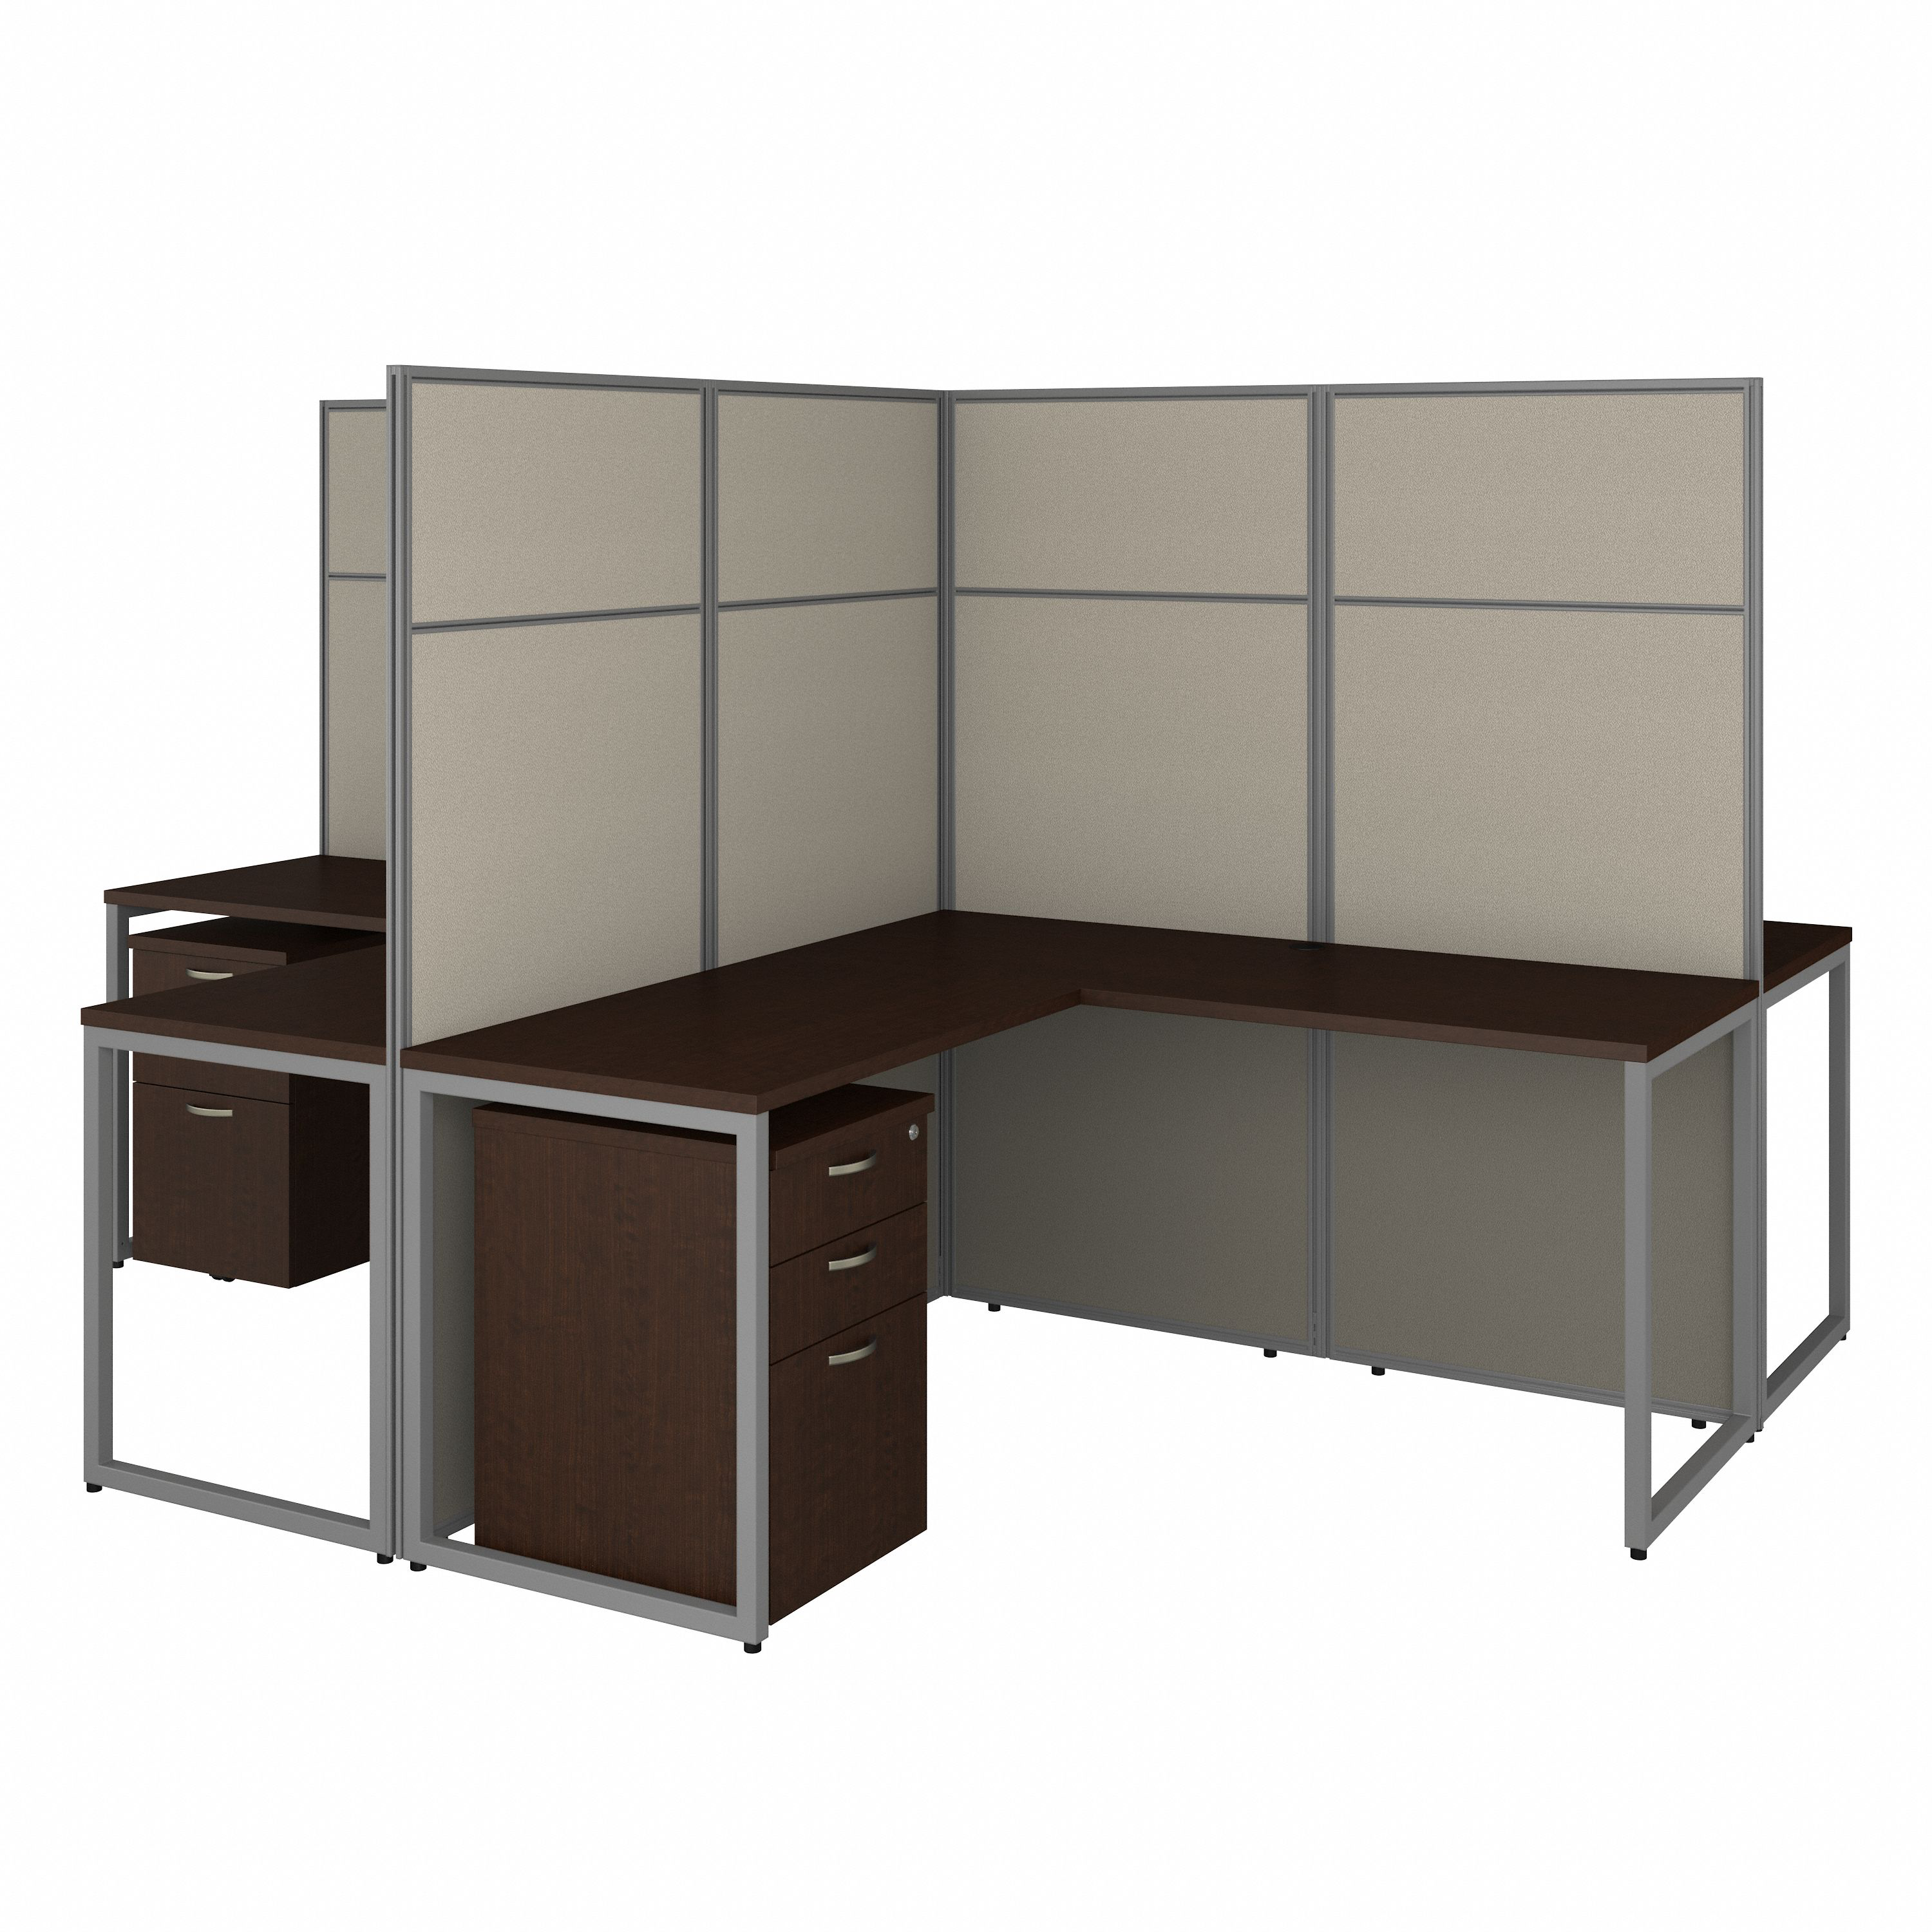 Shop Bush Business Furniture Easy Office 60W 4 Person L Shaped Cubicle Desk with Drawers and 66H Panels 02 EODH76SMR-03K #color_mocha cherry